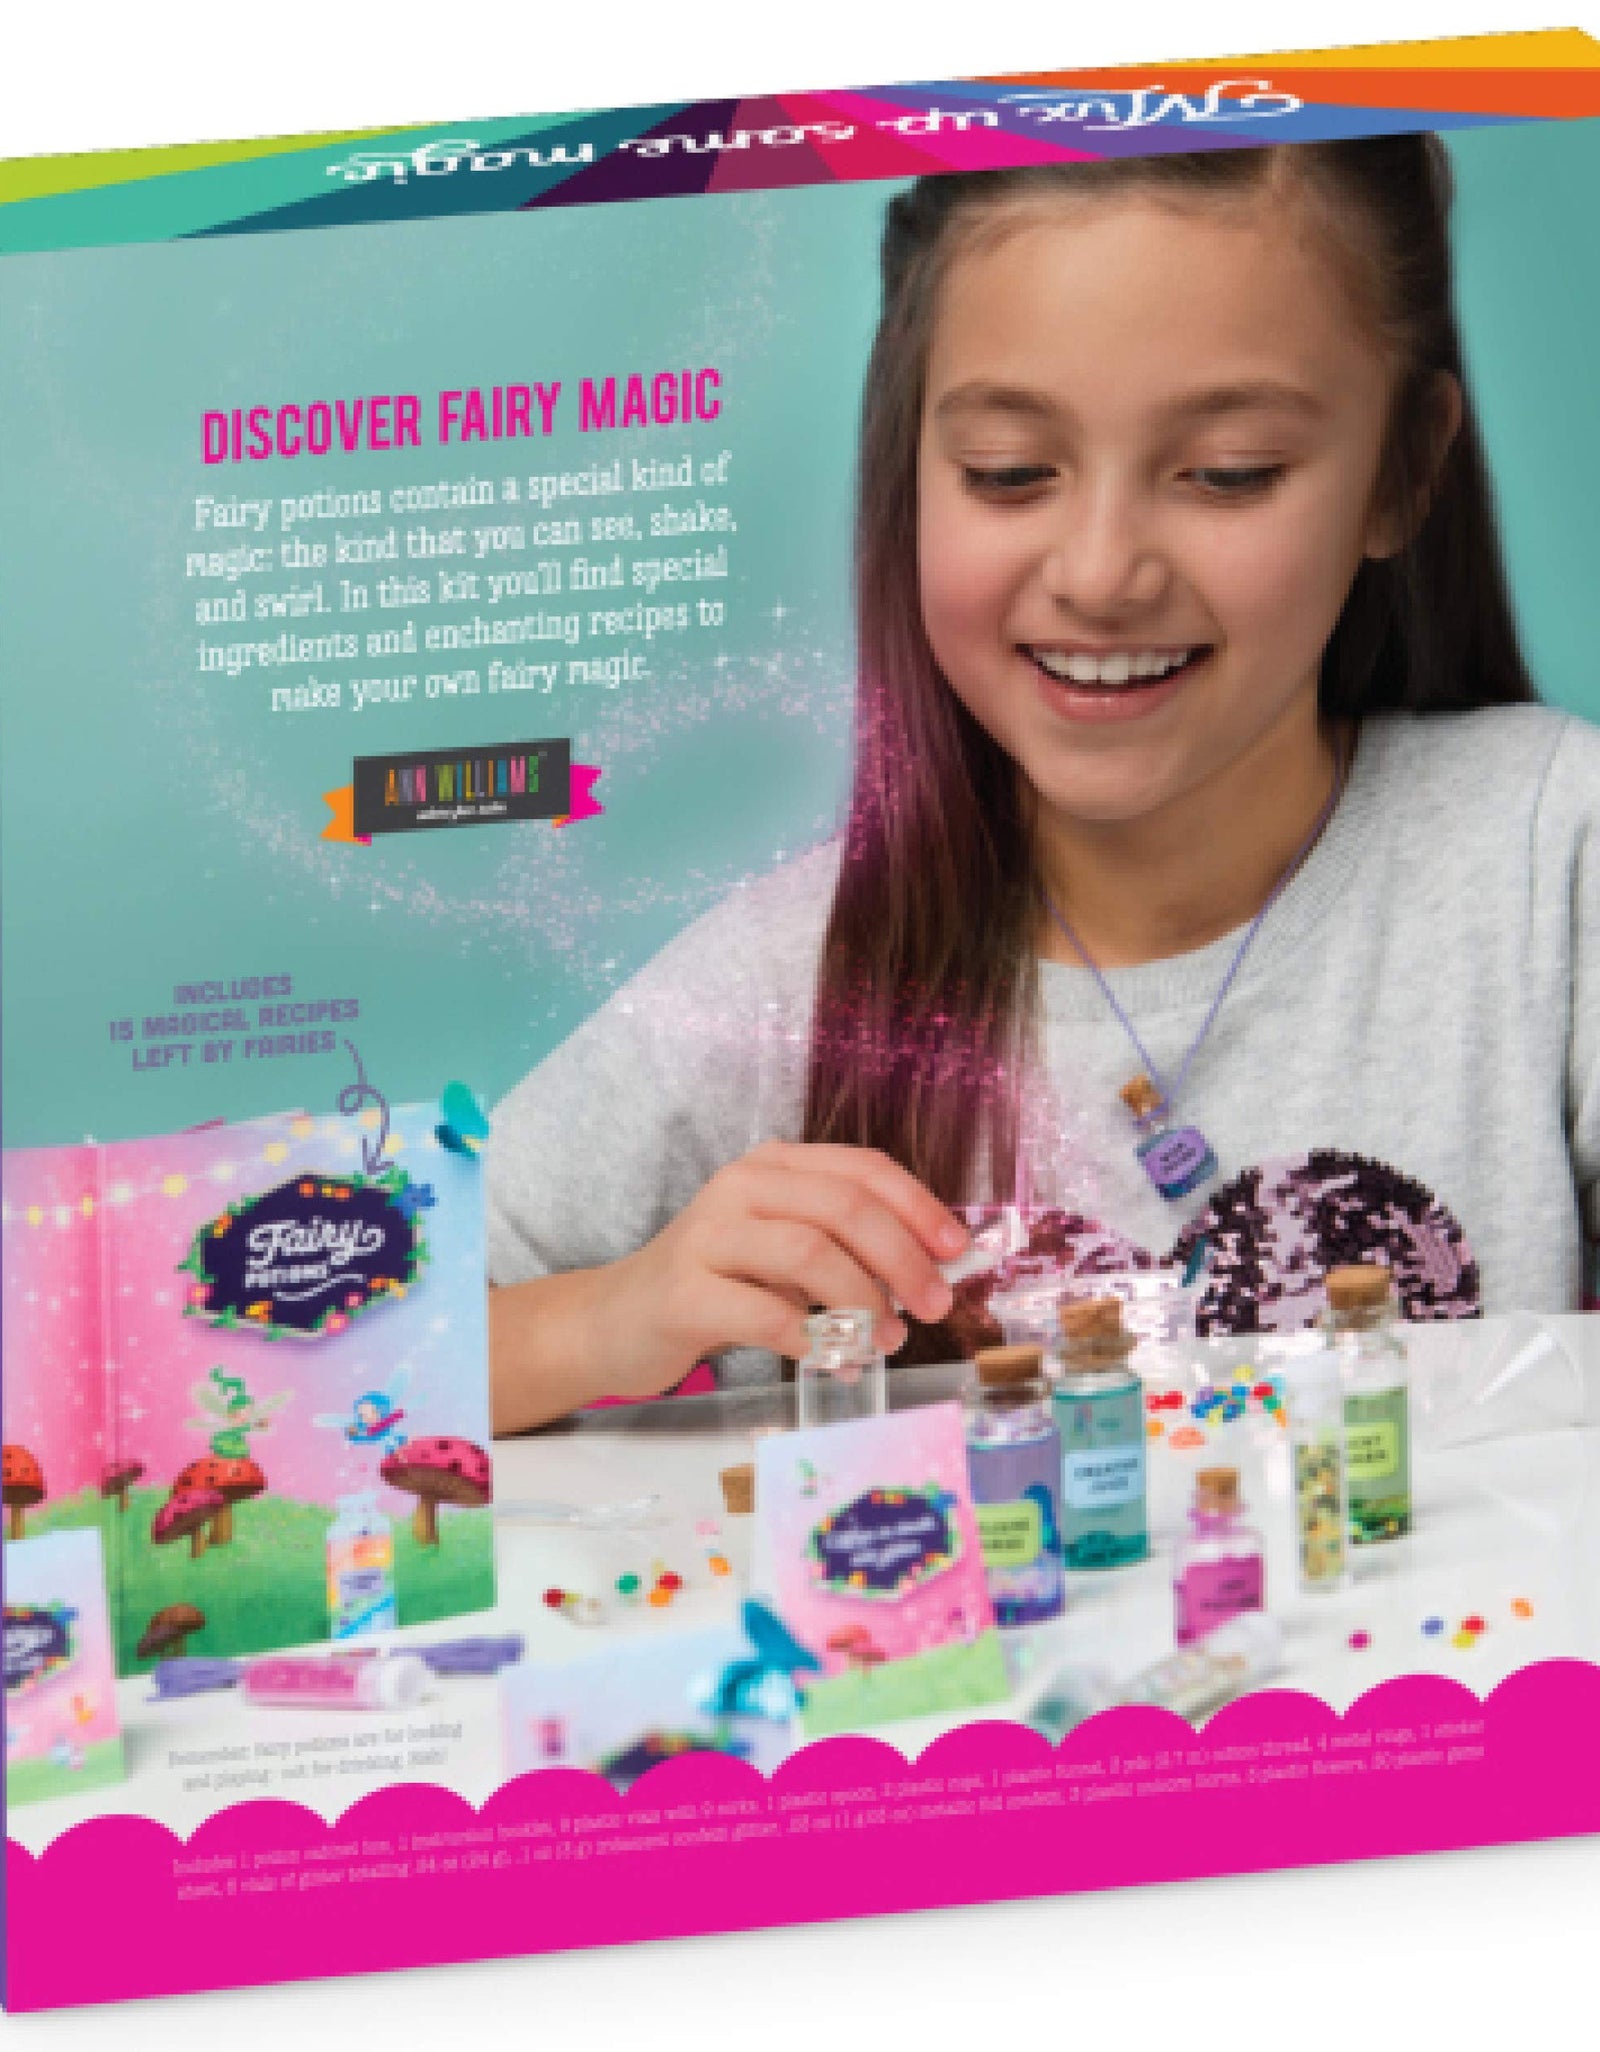 Craft-tastic – DIY Fairy Potions Kit – Award-Winning Arts & Crafts Set – Includes Fairy Potion Book with Magical Recipies, Enchanted Ingredients, Potion Cabinet & More! – Fun & Creative Gift for Kids